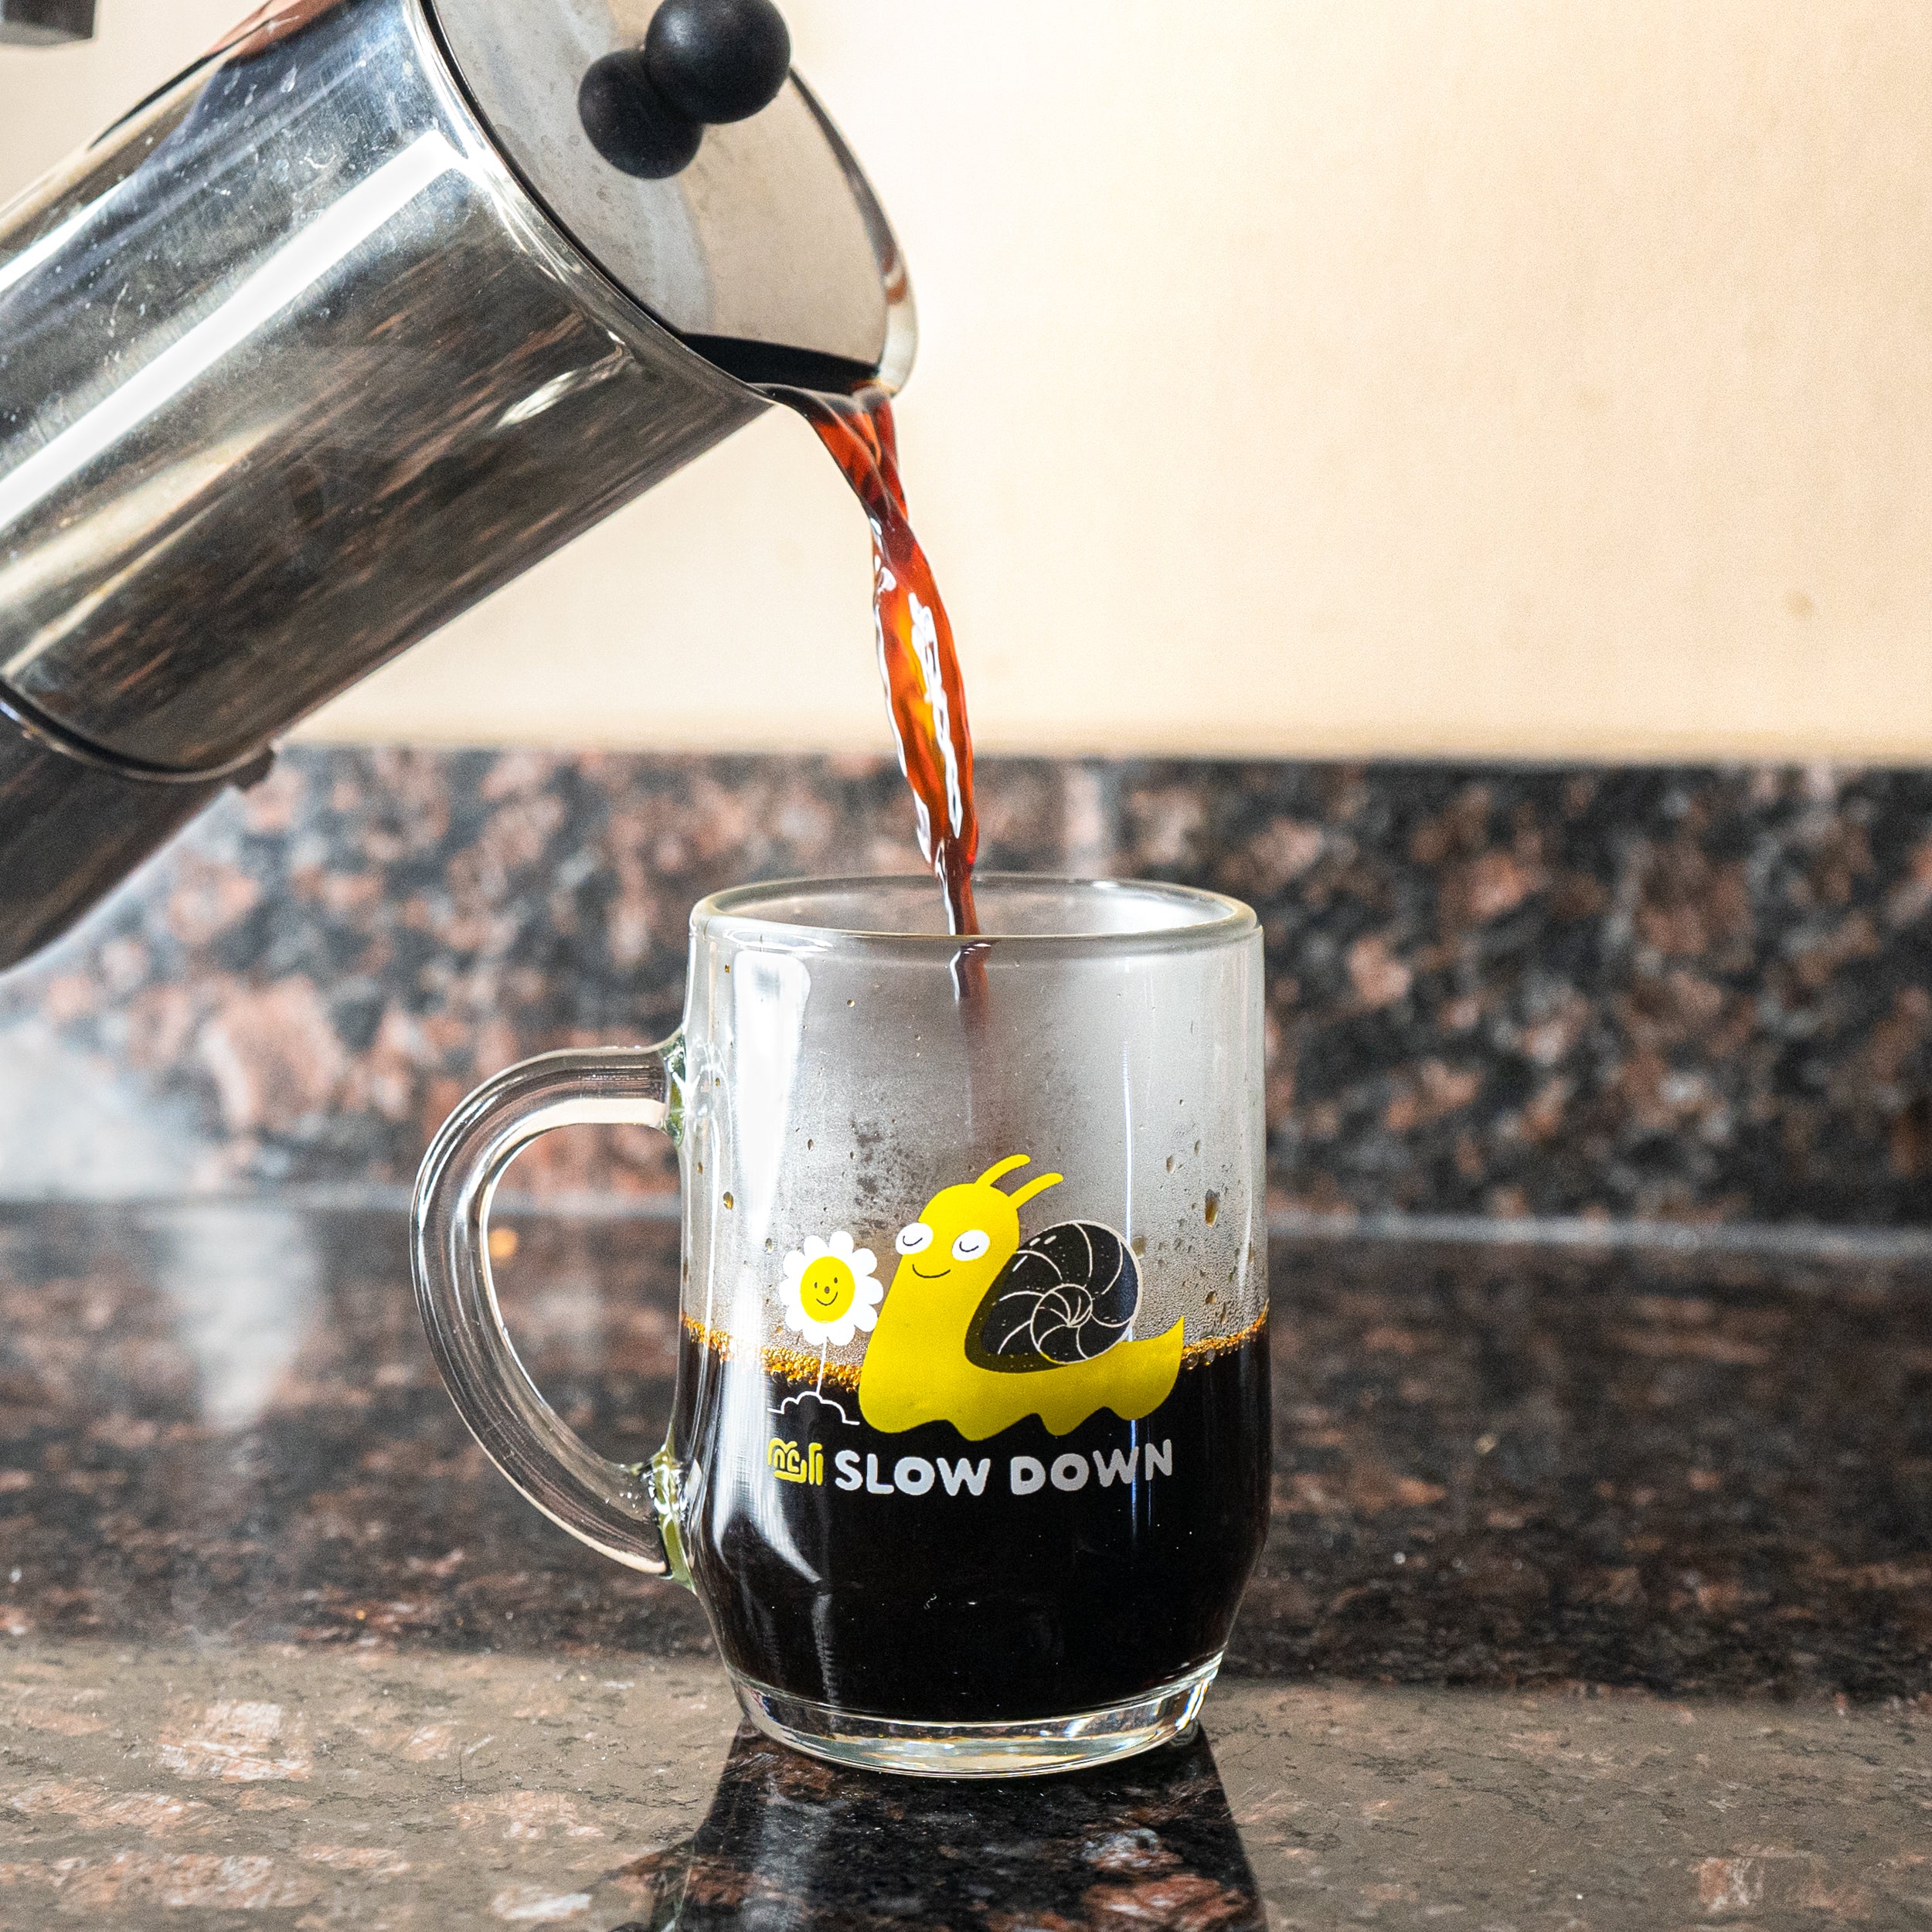 A Blackwing Slow Down Snail Mug being filled with coffee.